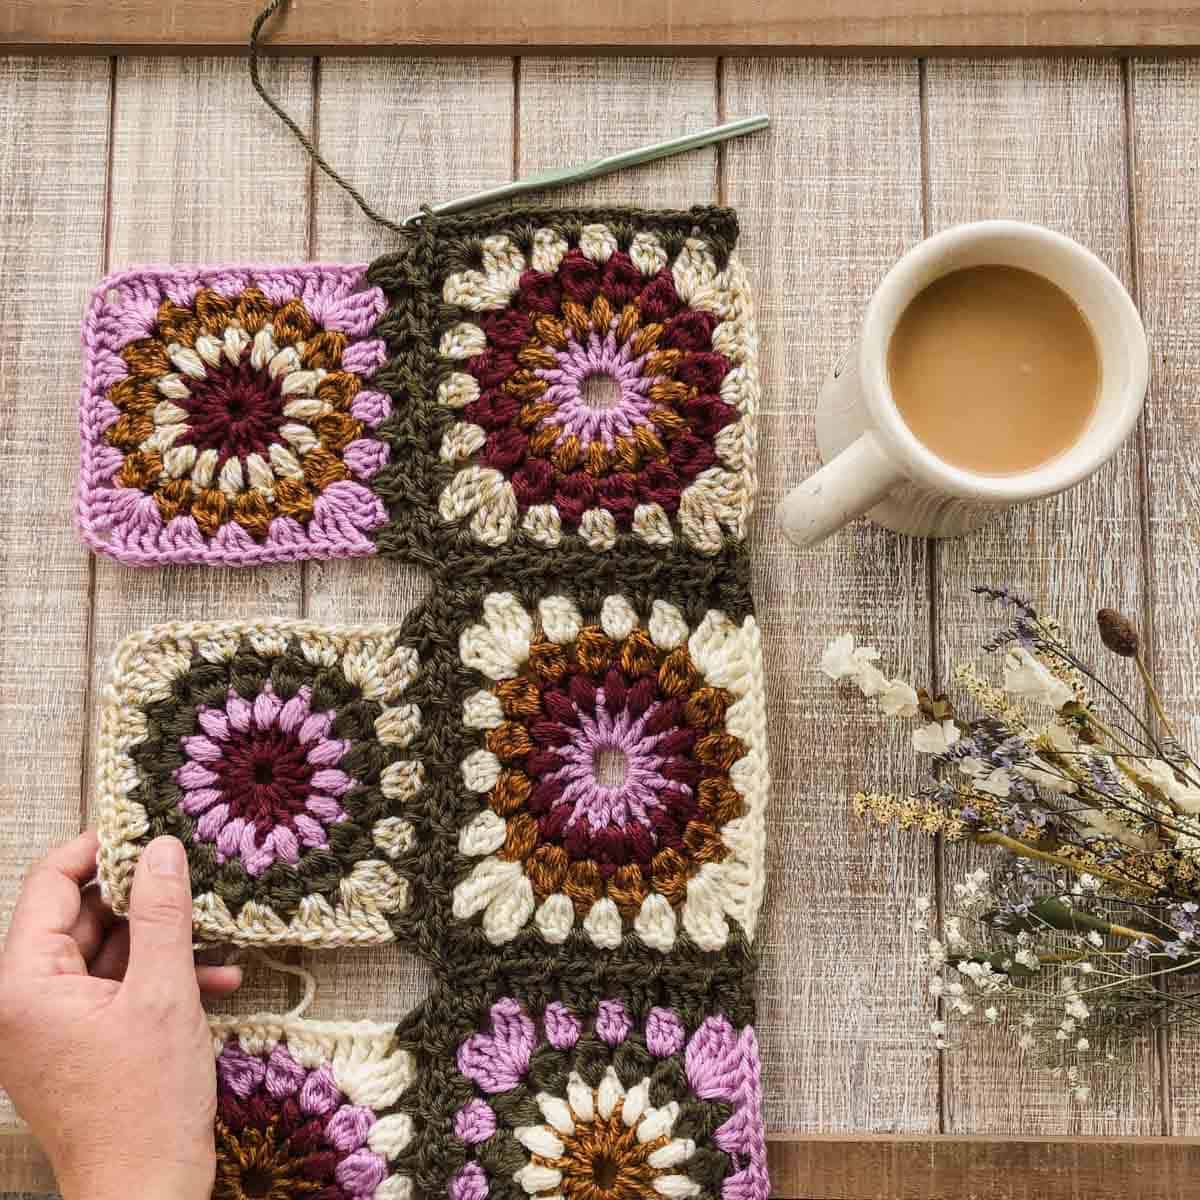 Flat lay of joined granny squares with a hand holding one square, a white mug with coffee, and dried flowers on the table.